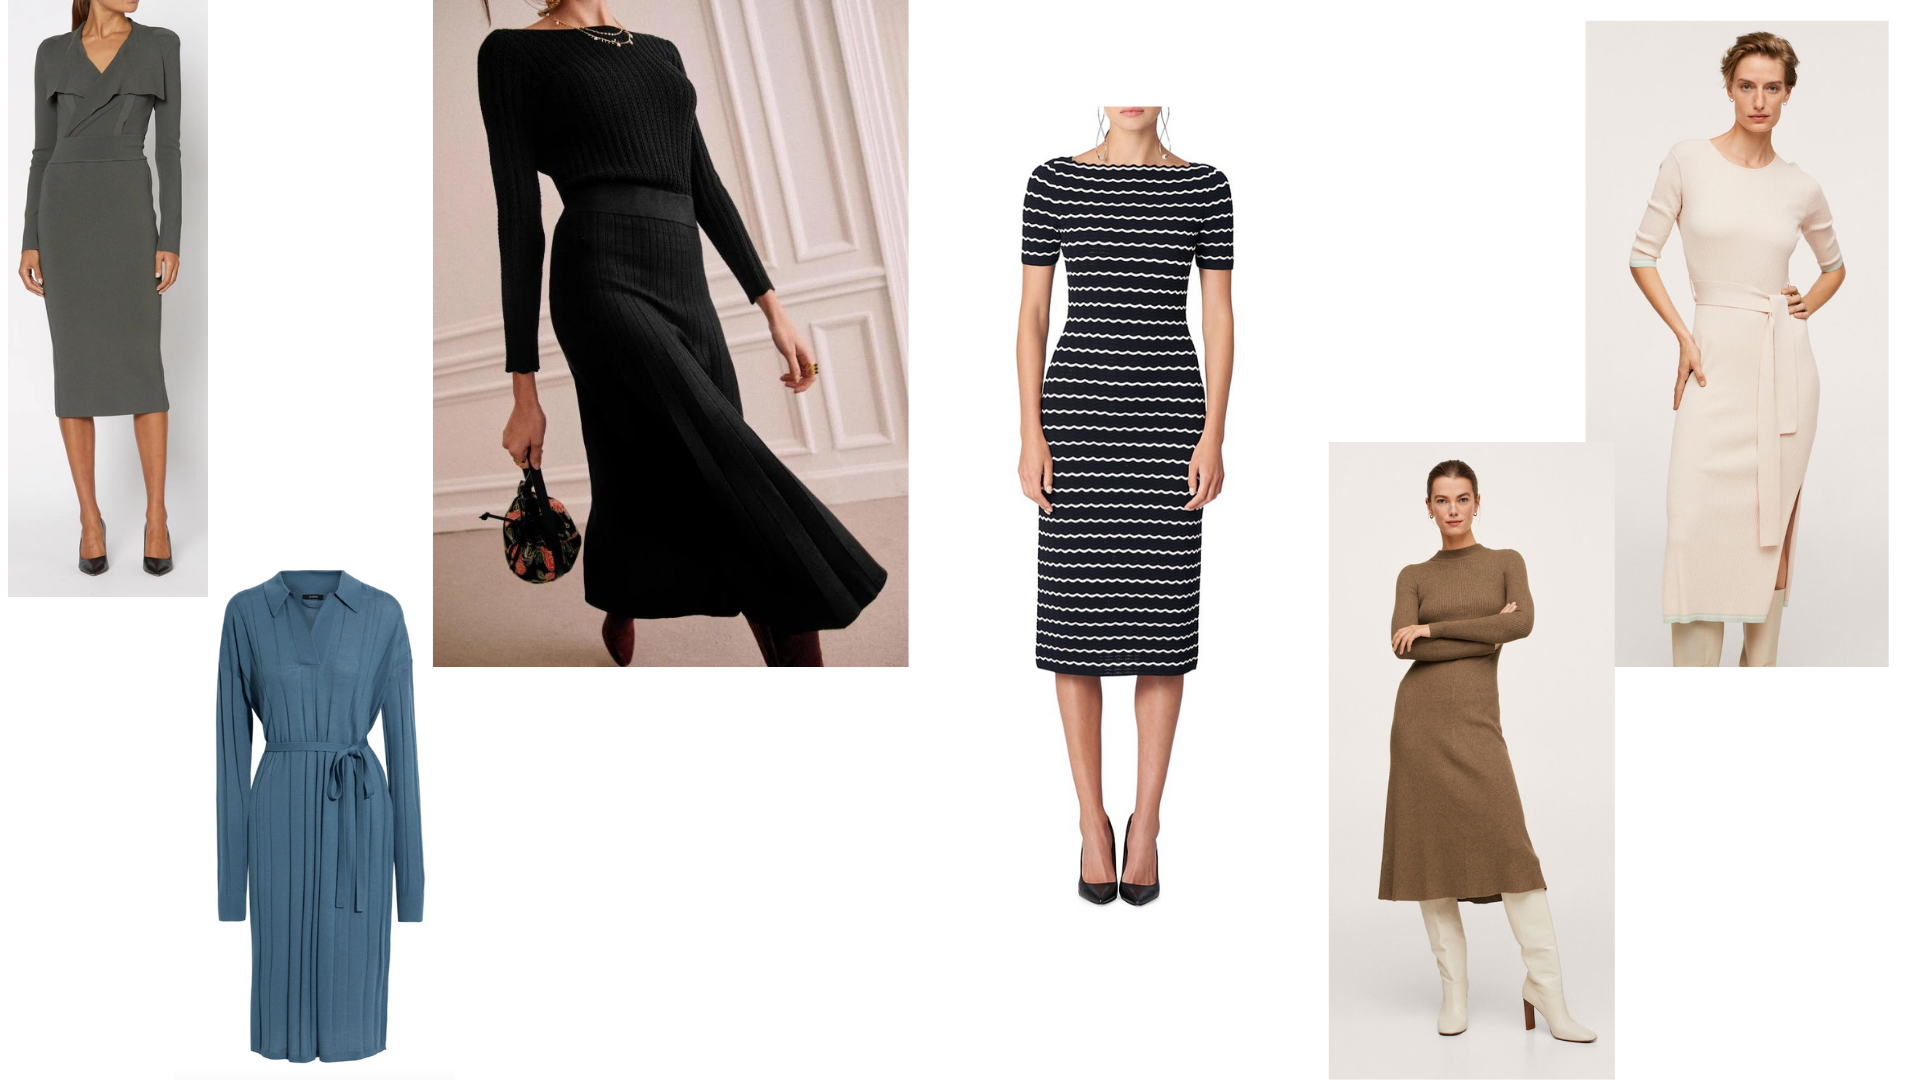 The Warmth & Style of Knit Dresses